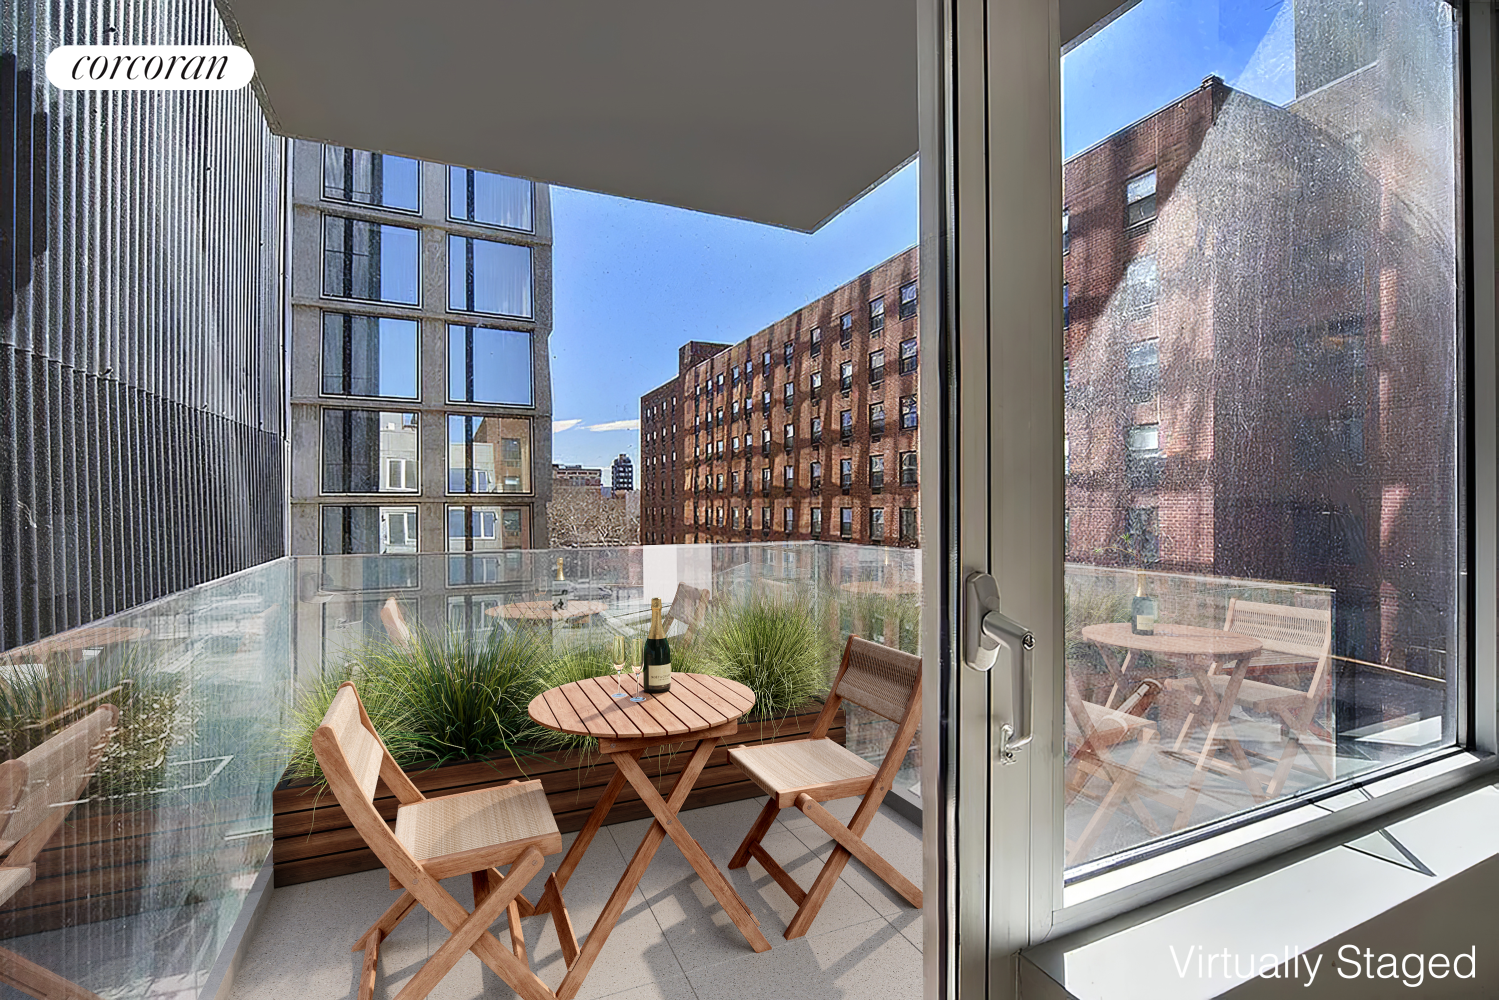 255 Bowery 5, Lower East Side, Downtown, NYC - 2 Bedrooms  
2 Bathrooms  
5 Rooms - 